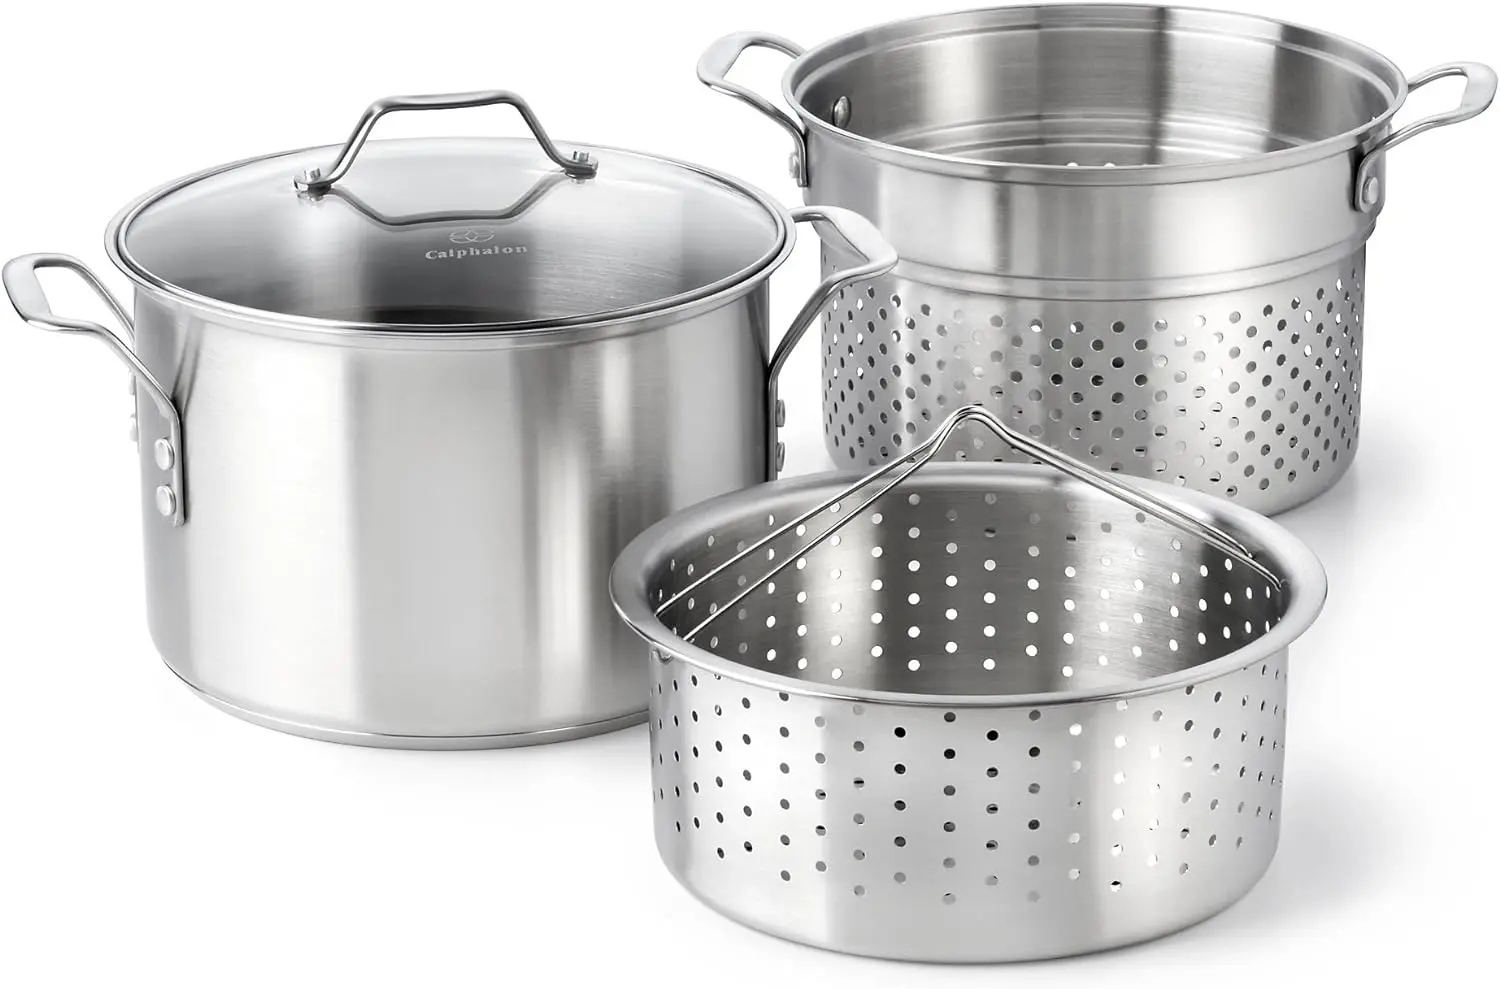 

Stainless Steel 8 quart Stock Pot with Steamer and Pasta Insert Sauce dish Green dishes Restaurant plates Modern plates